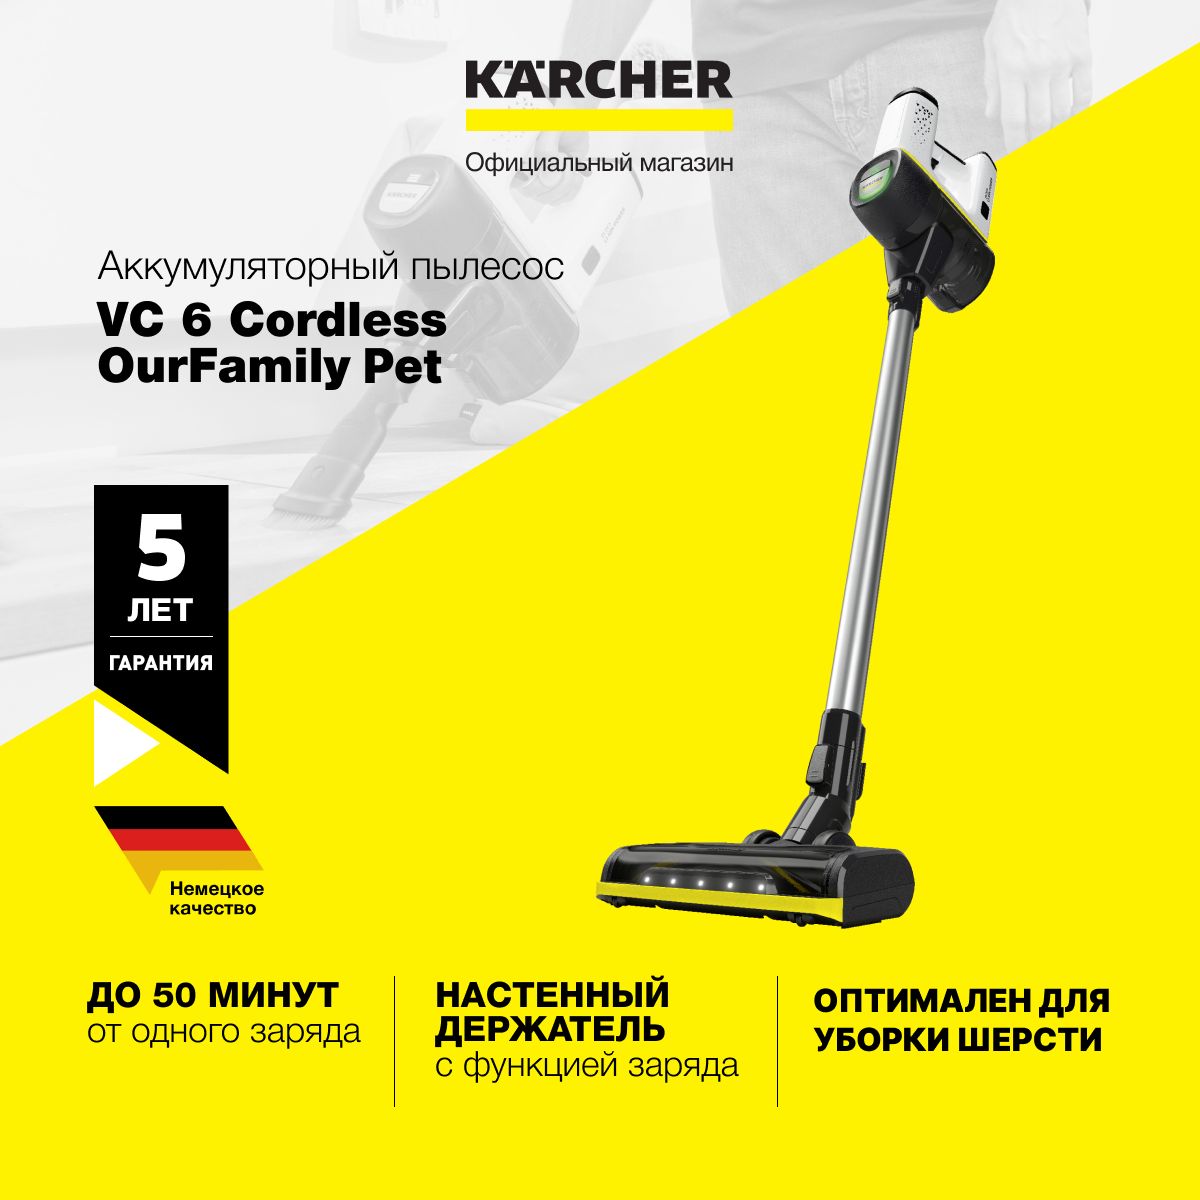 Vc 6 cordless ourfamily pet